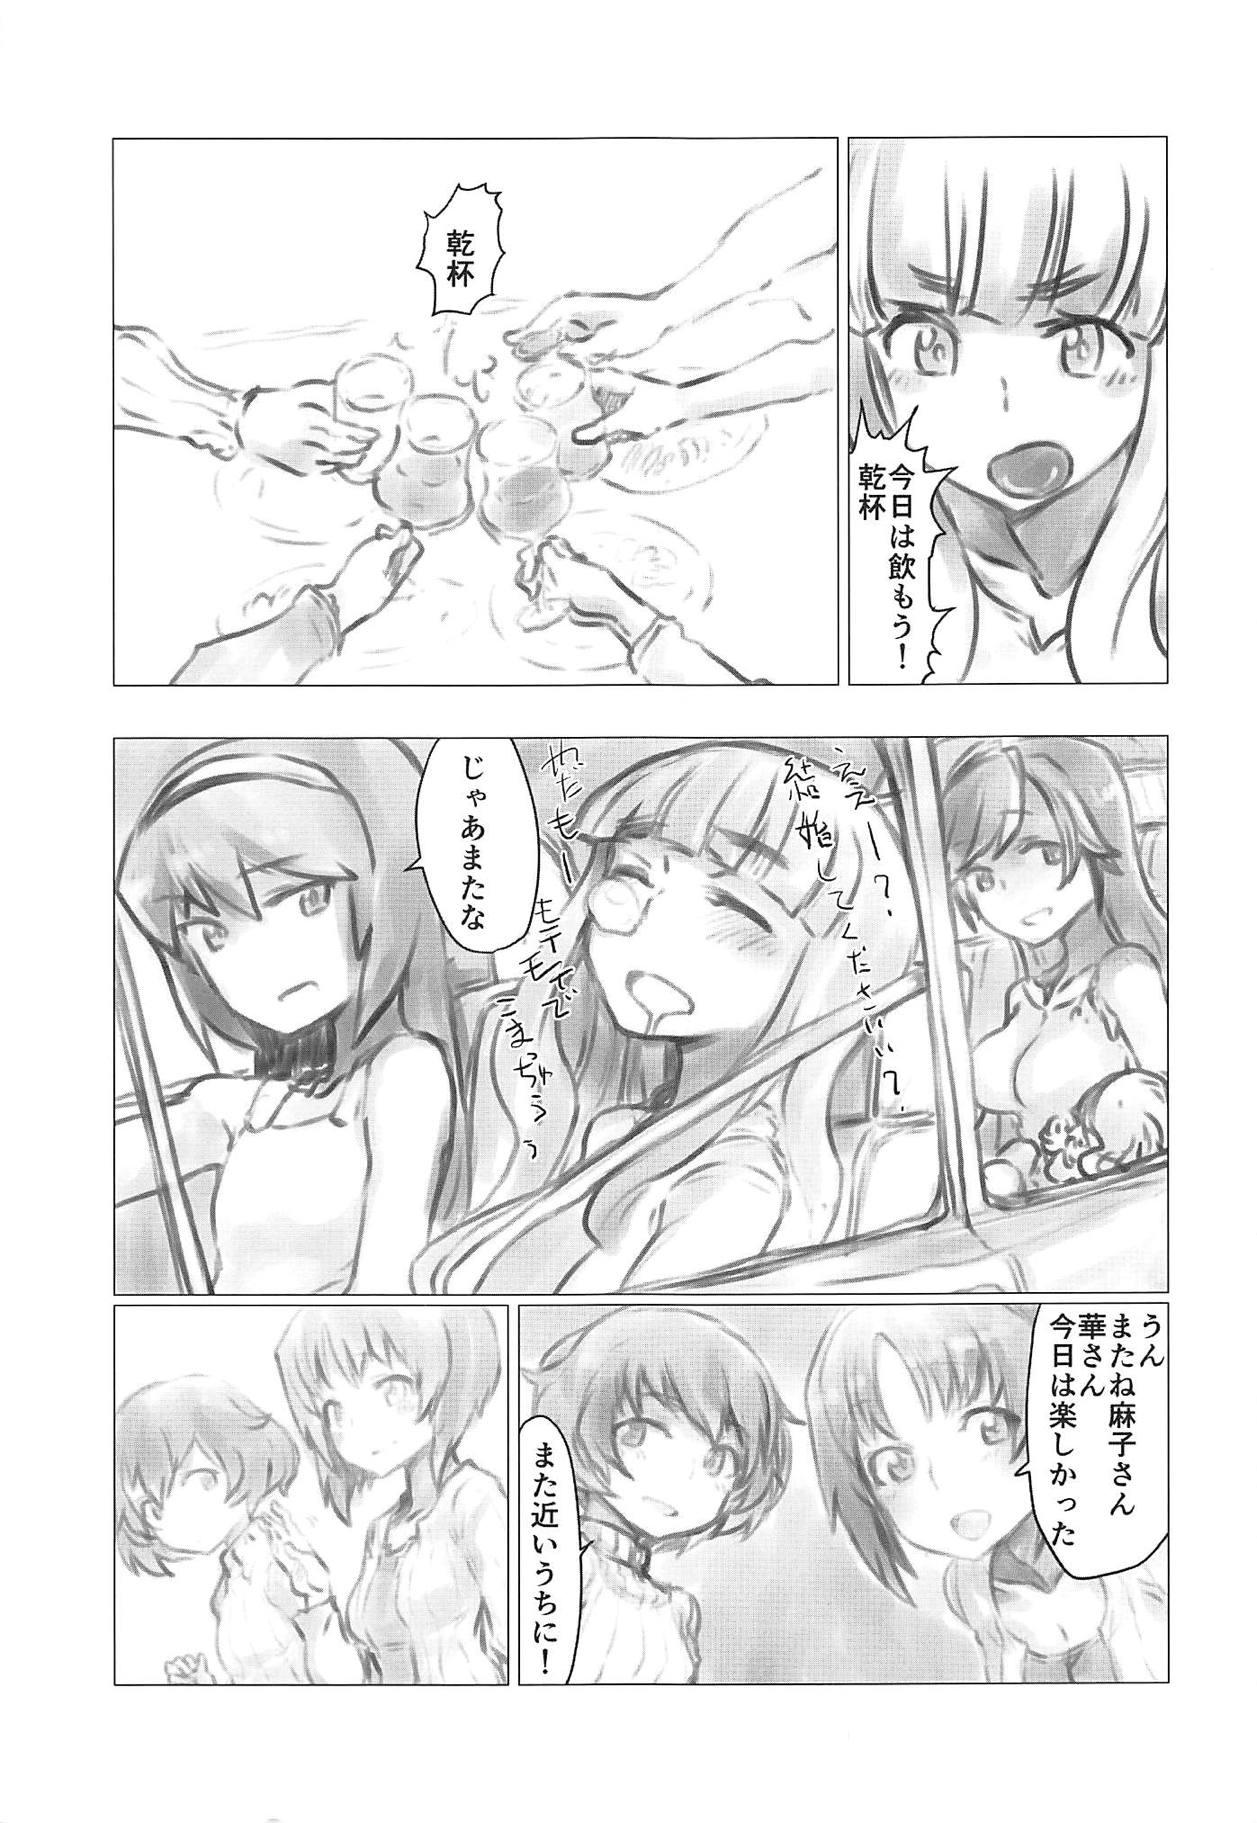 Amatur Porn THE DOG MAY STAND THE STRONG INSTEAD - Girls und panzer Fucking Girls - Page 4